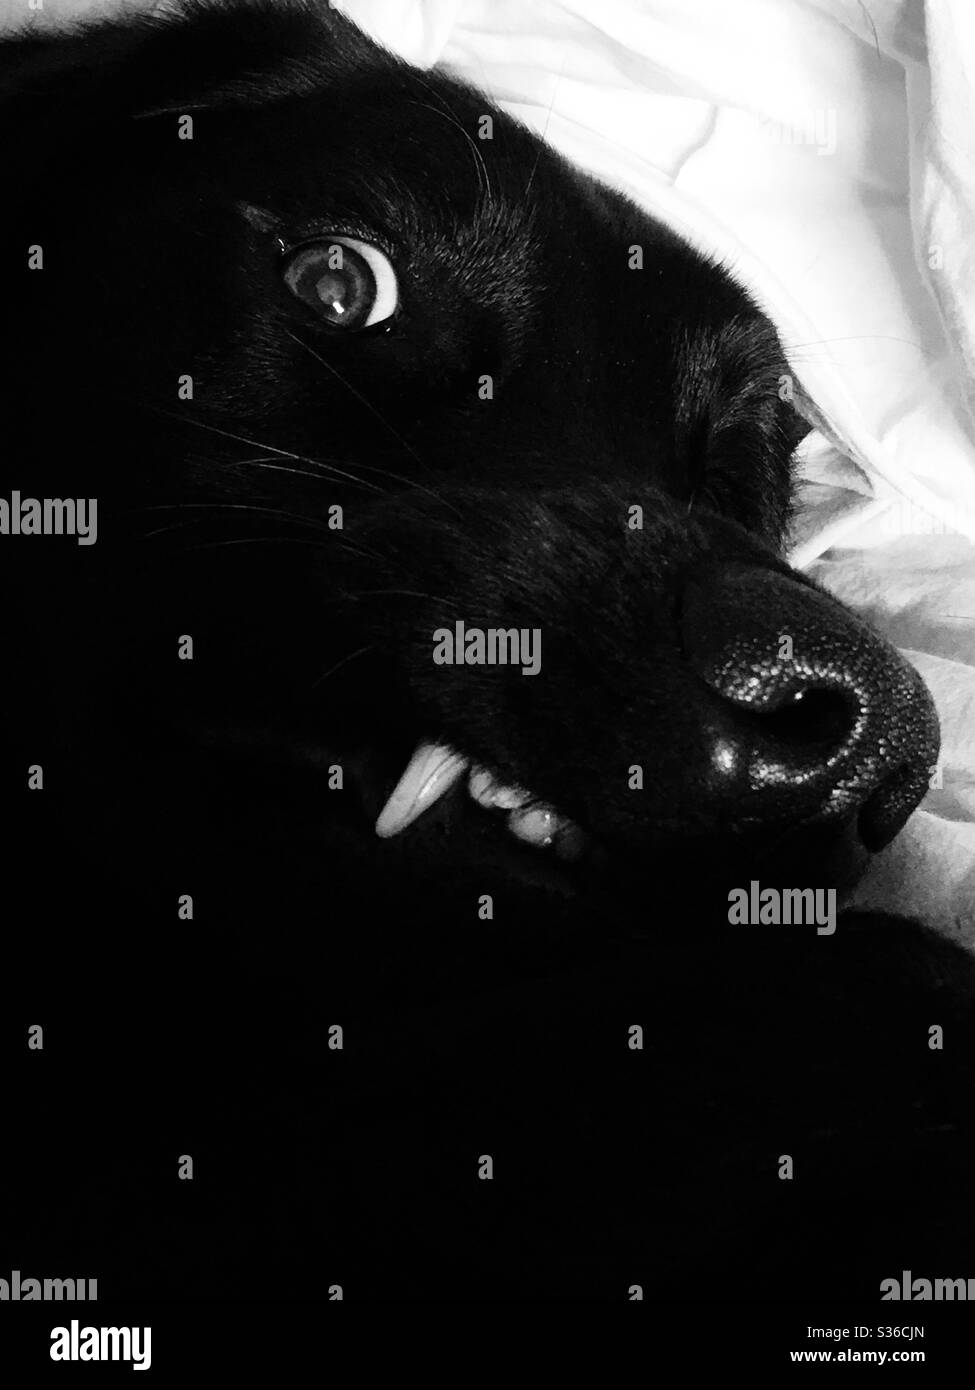 Vicious looking dog showing teeth and whites of eye close up in black and white Stock Photo